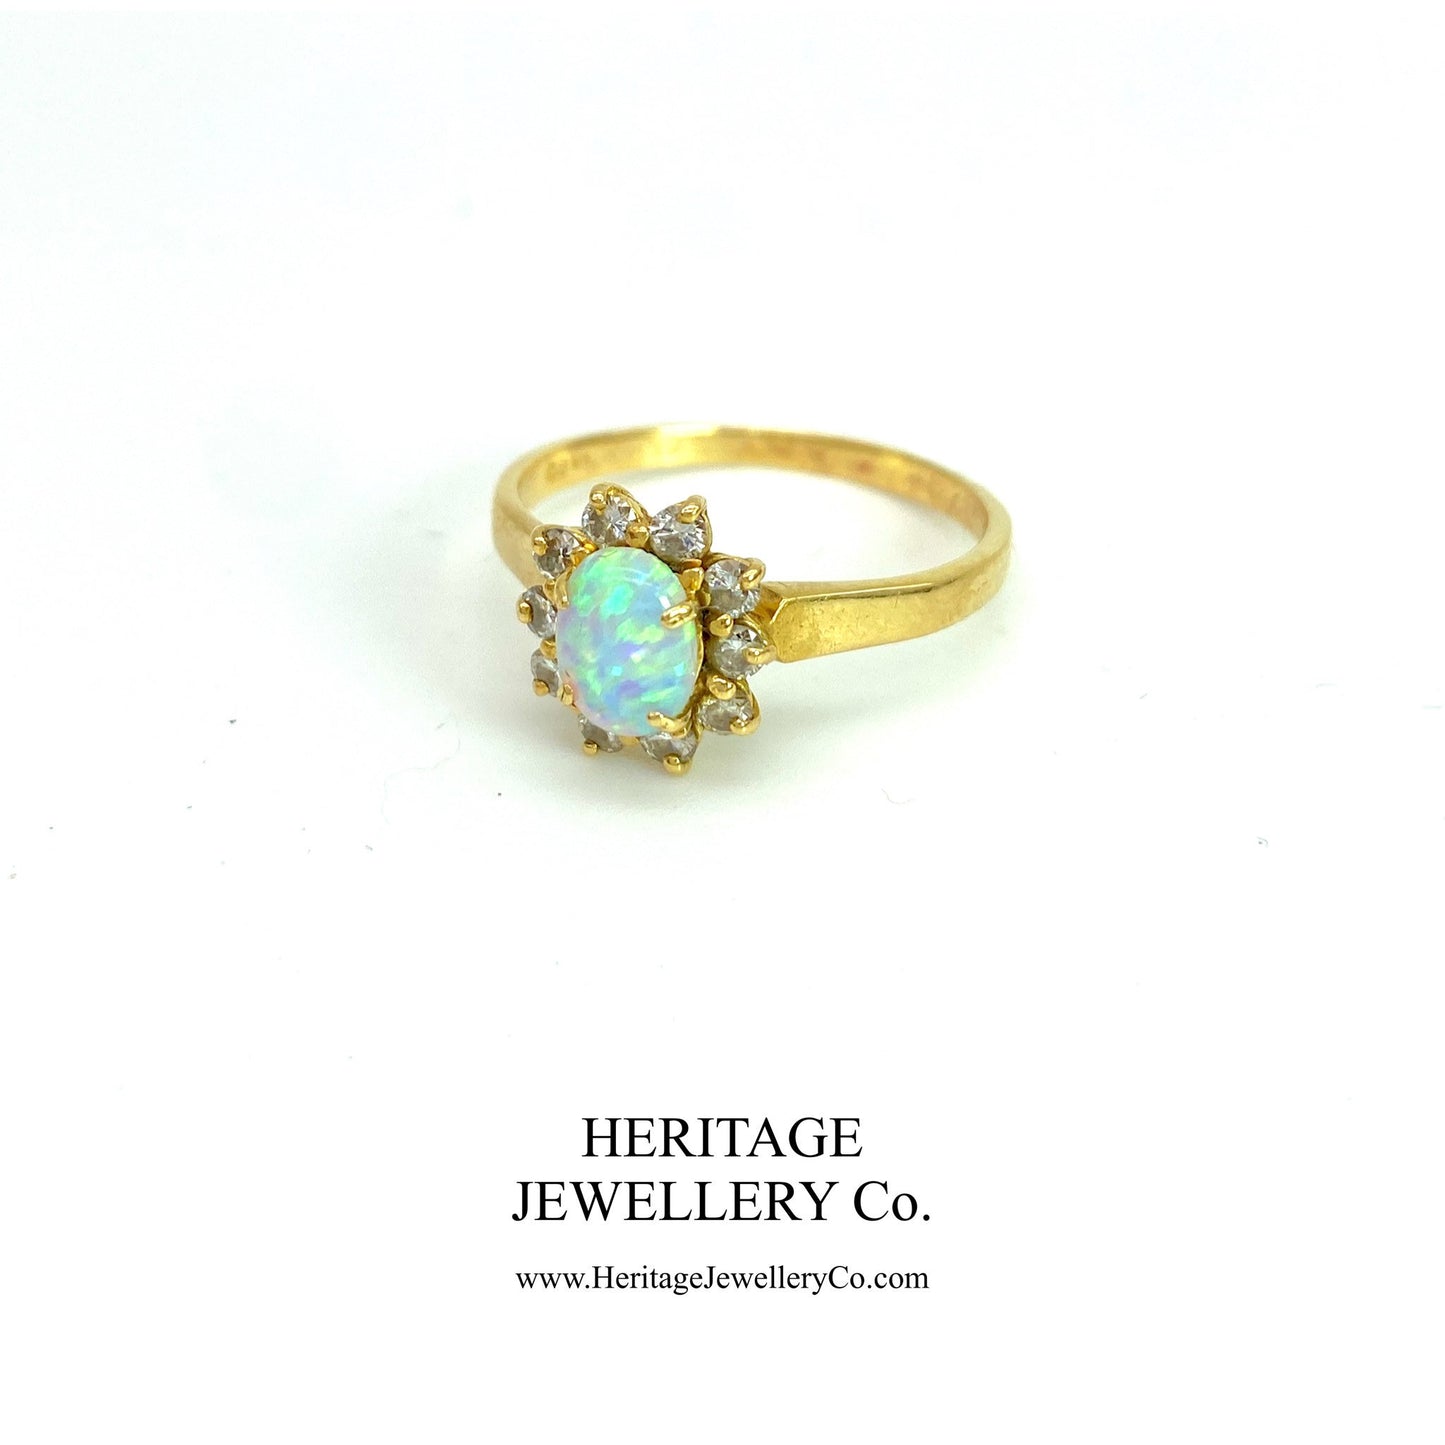 Vintage Fiery Opal and Diamond Ring